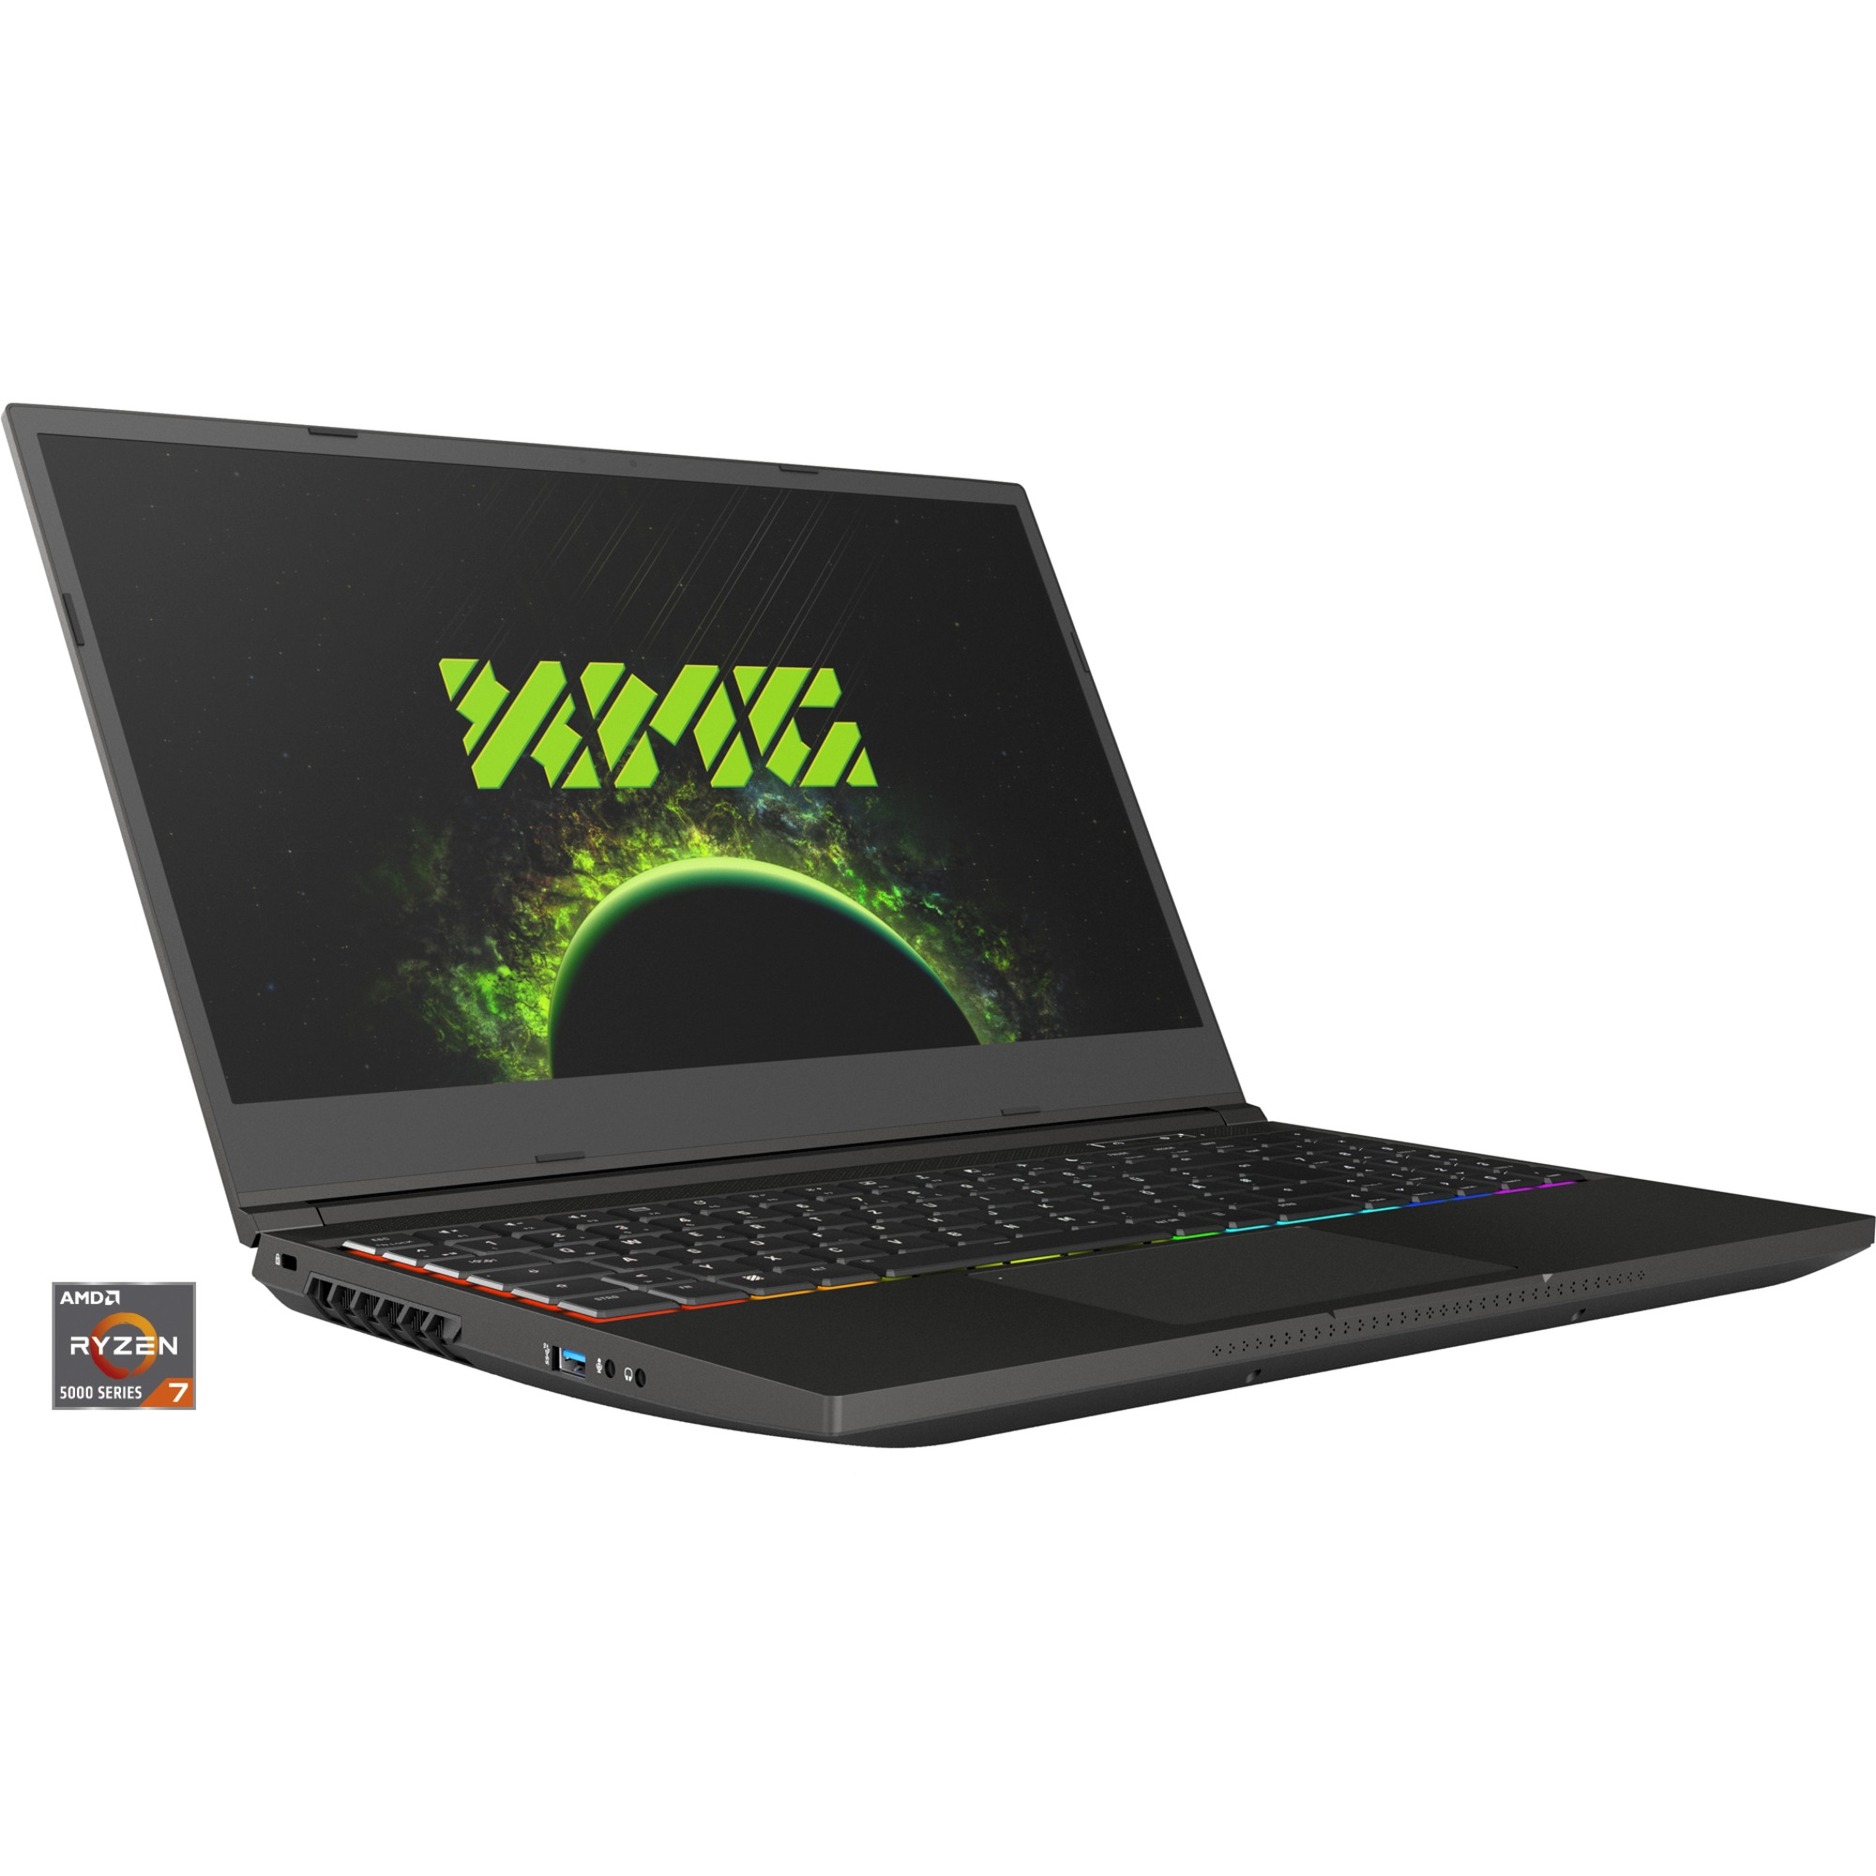 NEO 15 (10505805), Gaming-Notebook